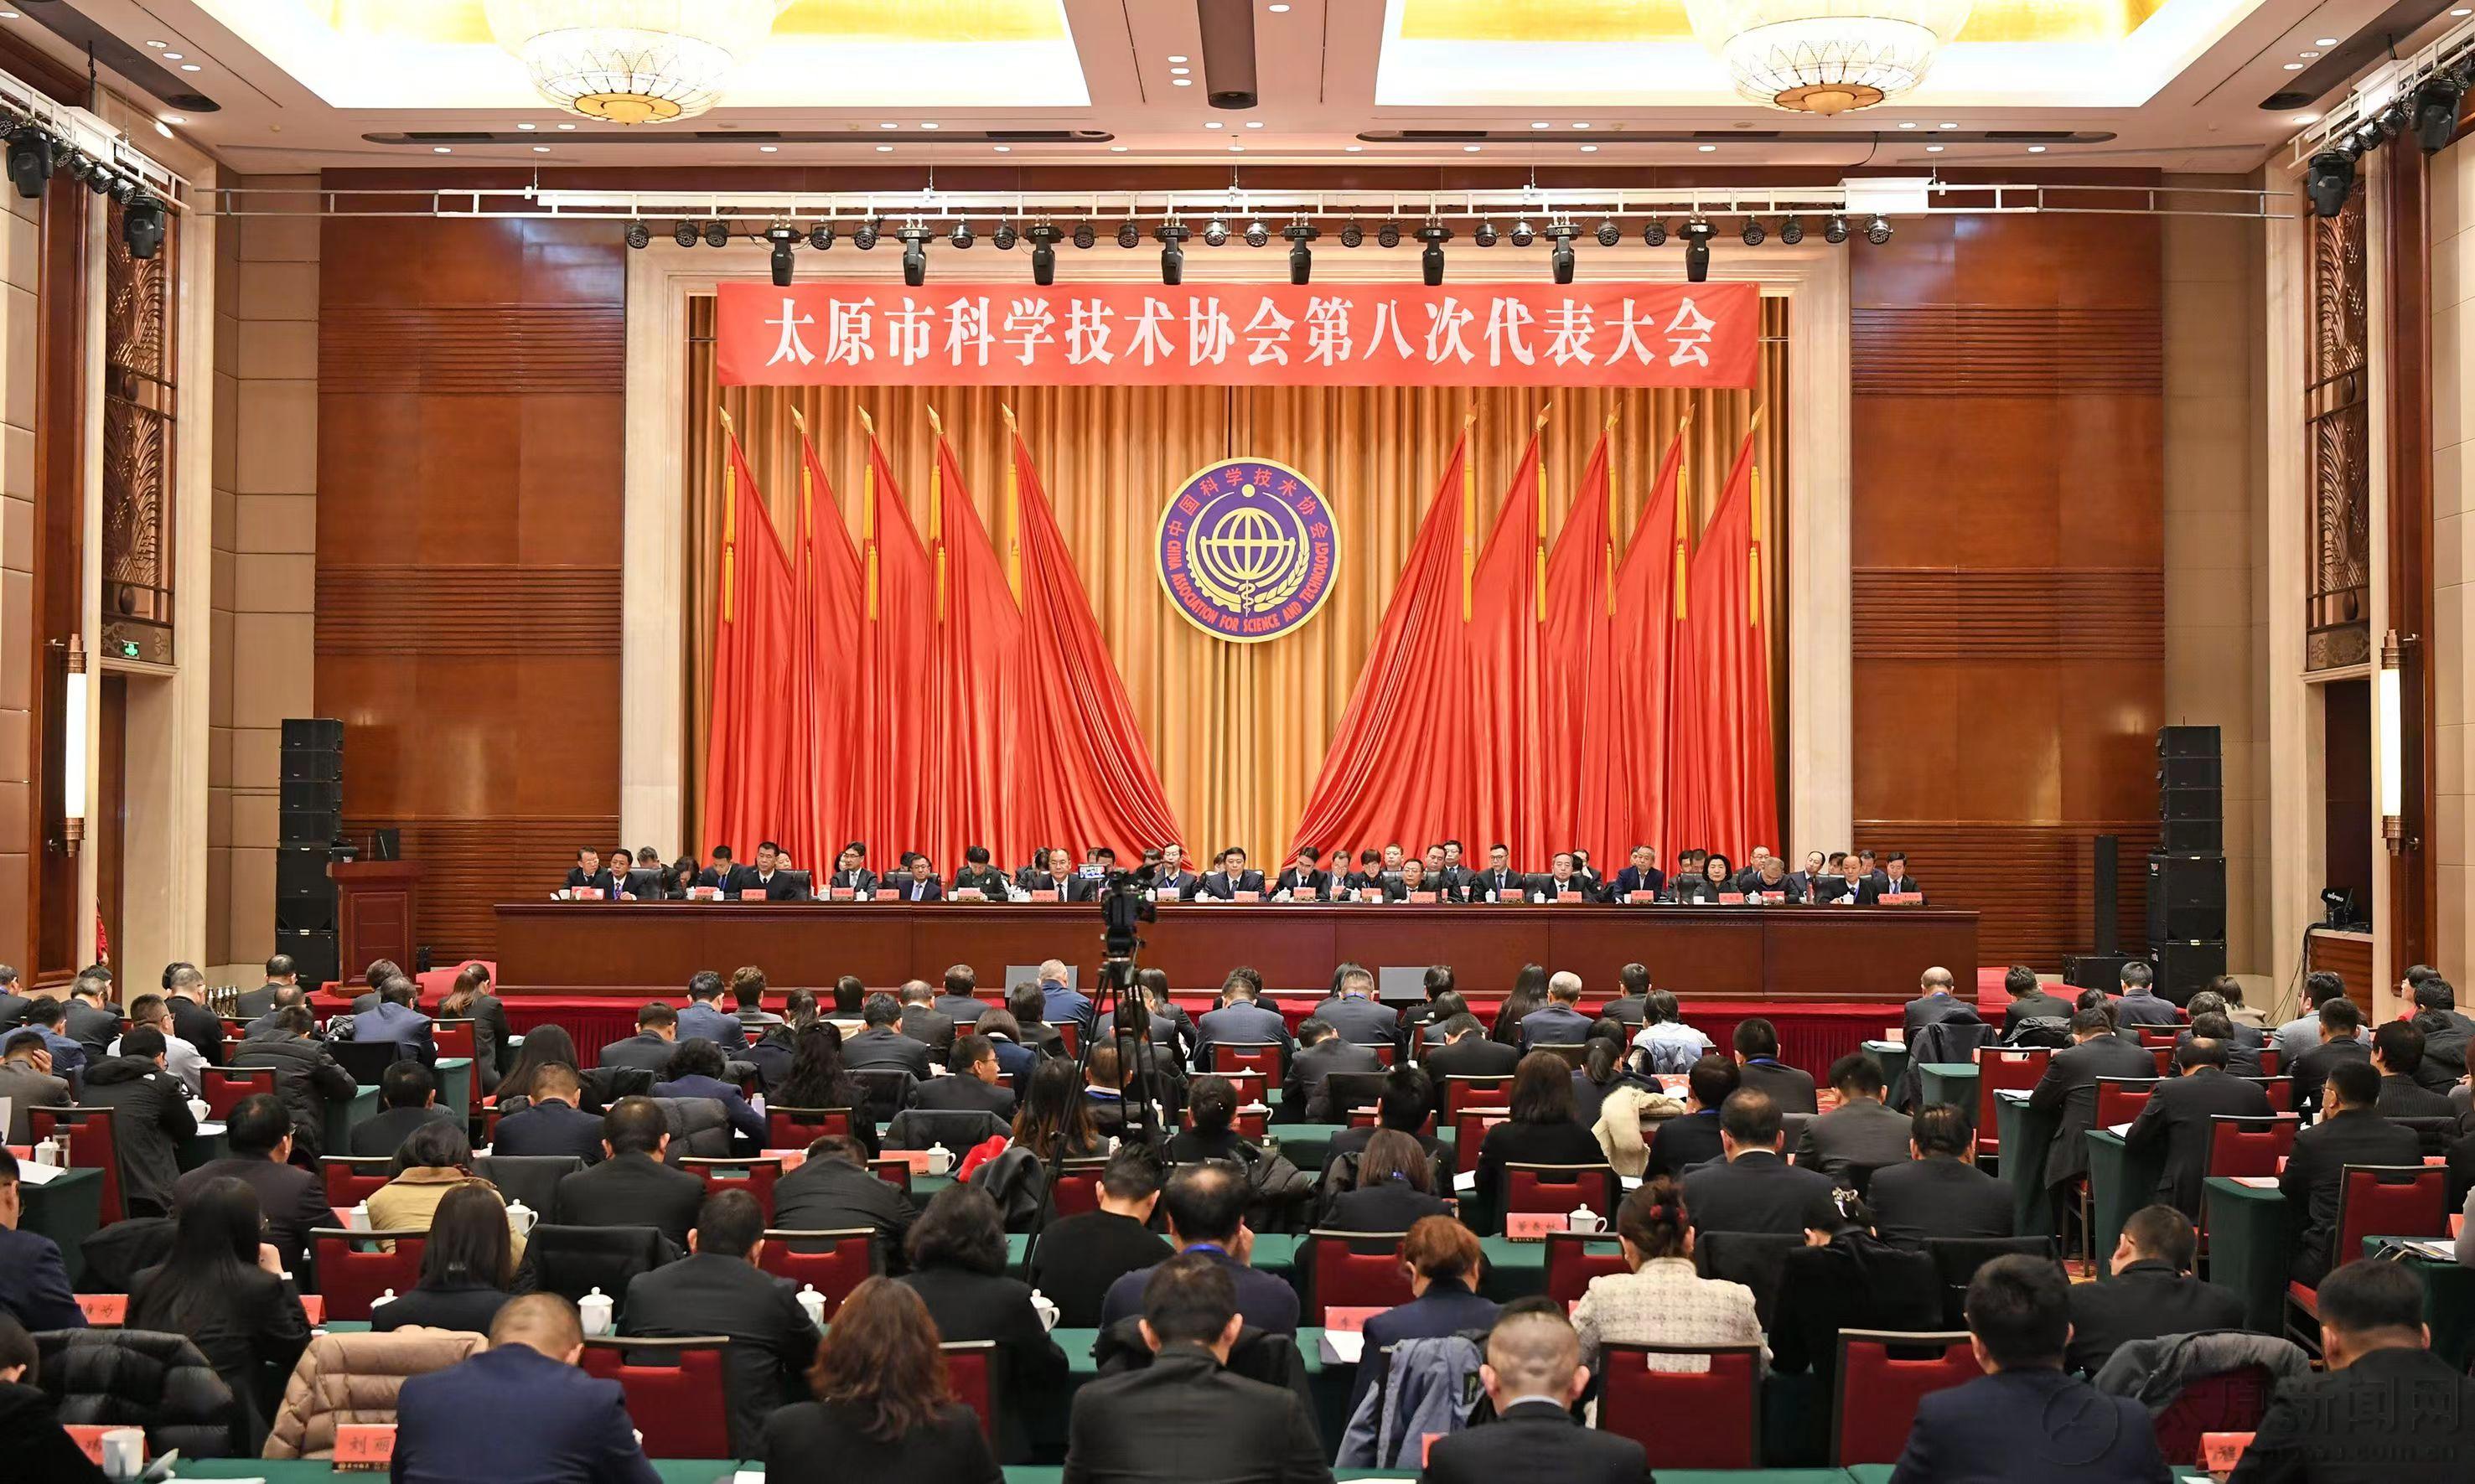 The opening of the Eighth Congress of Taiyuan Science and Technology Association, Wei Tao attended and spoke